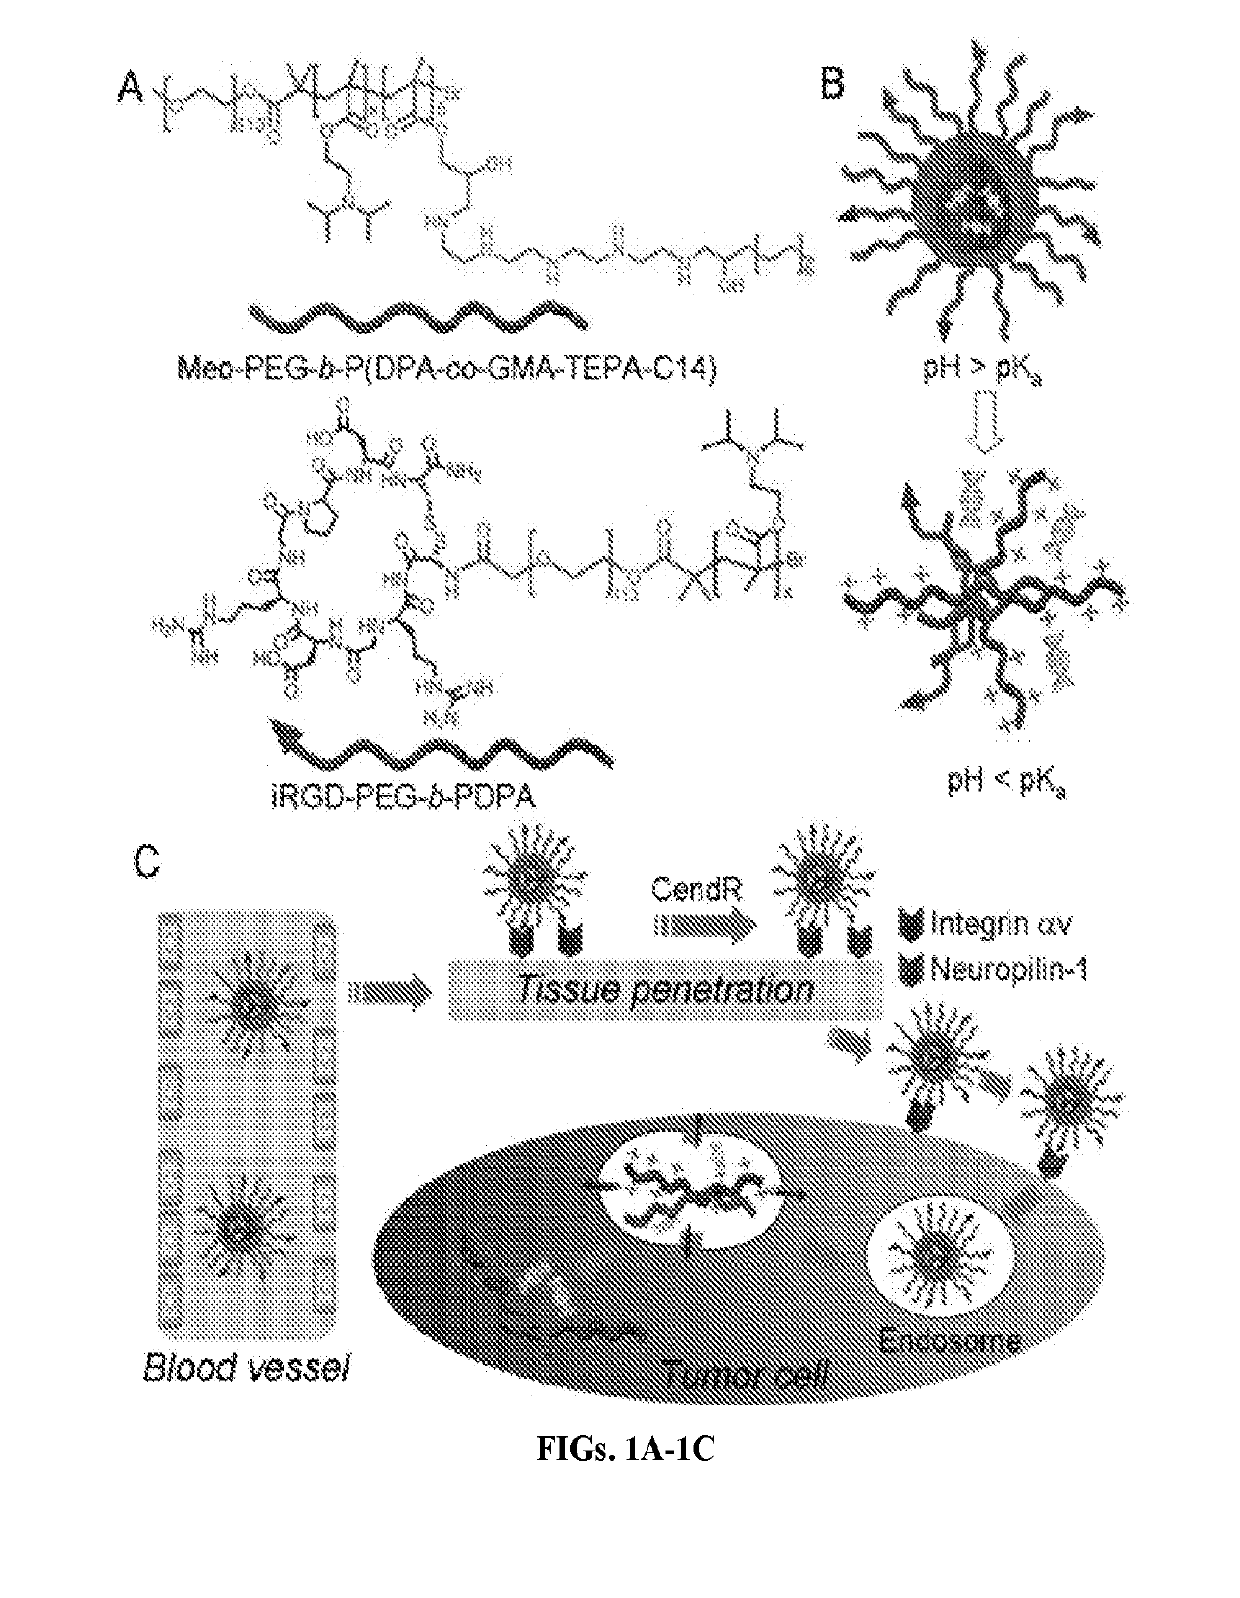 Stimuli-responsive nanoparticles for biomedical applications